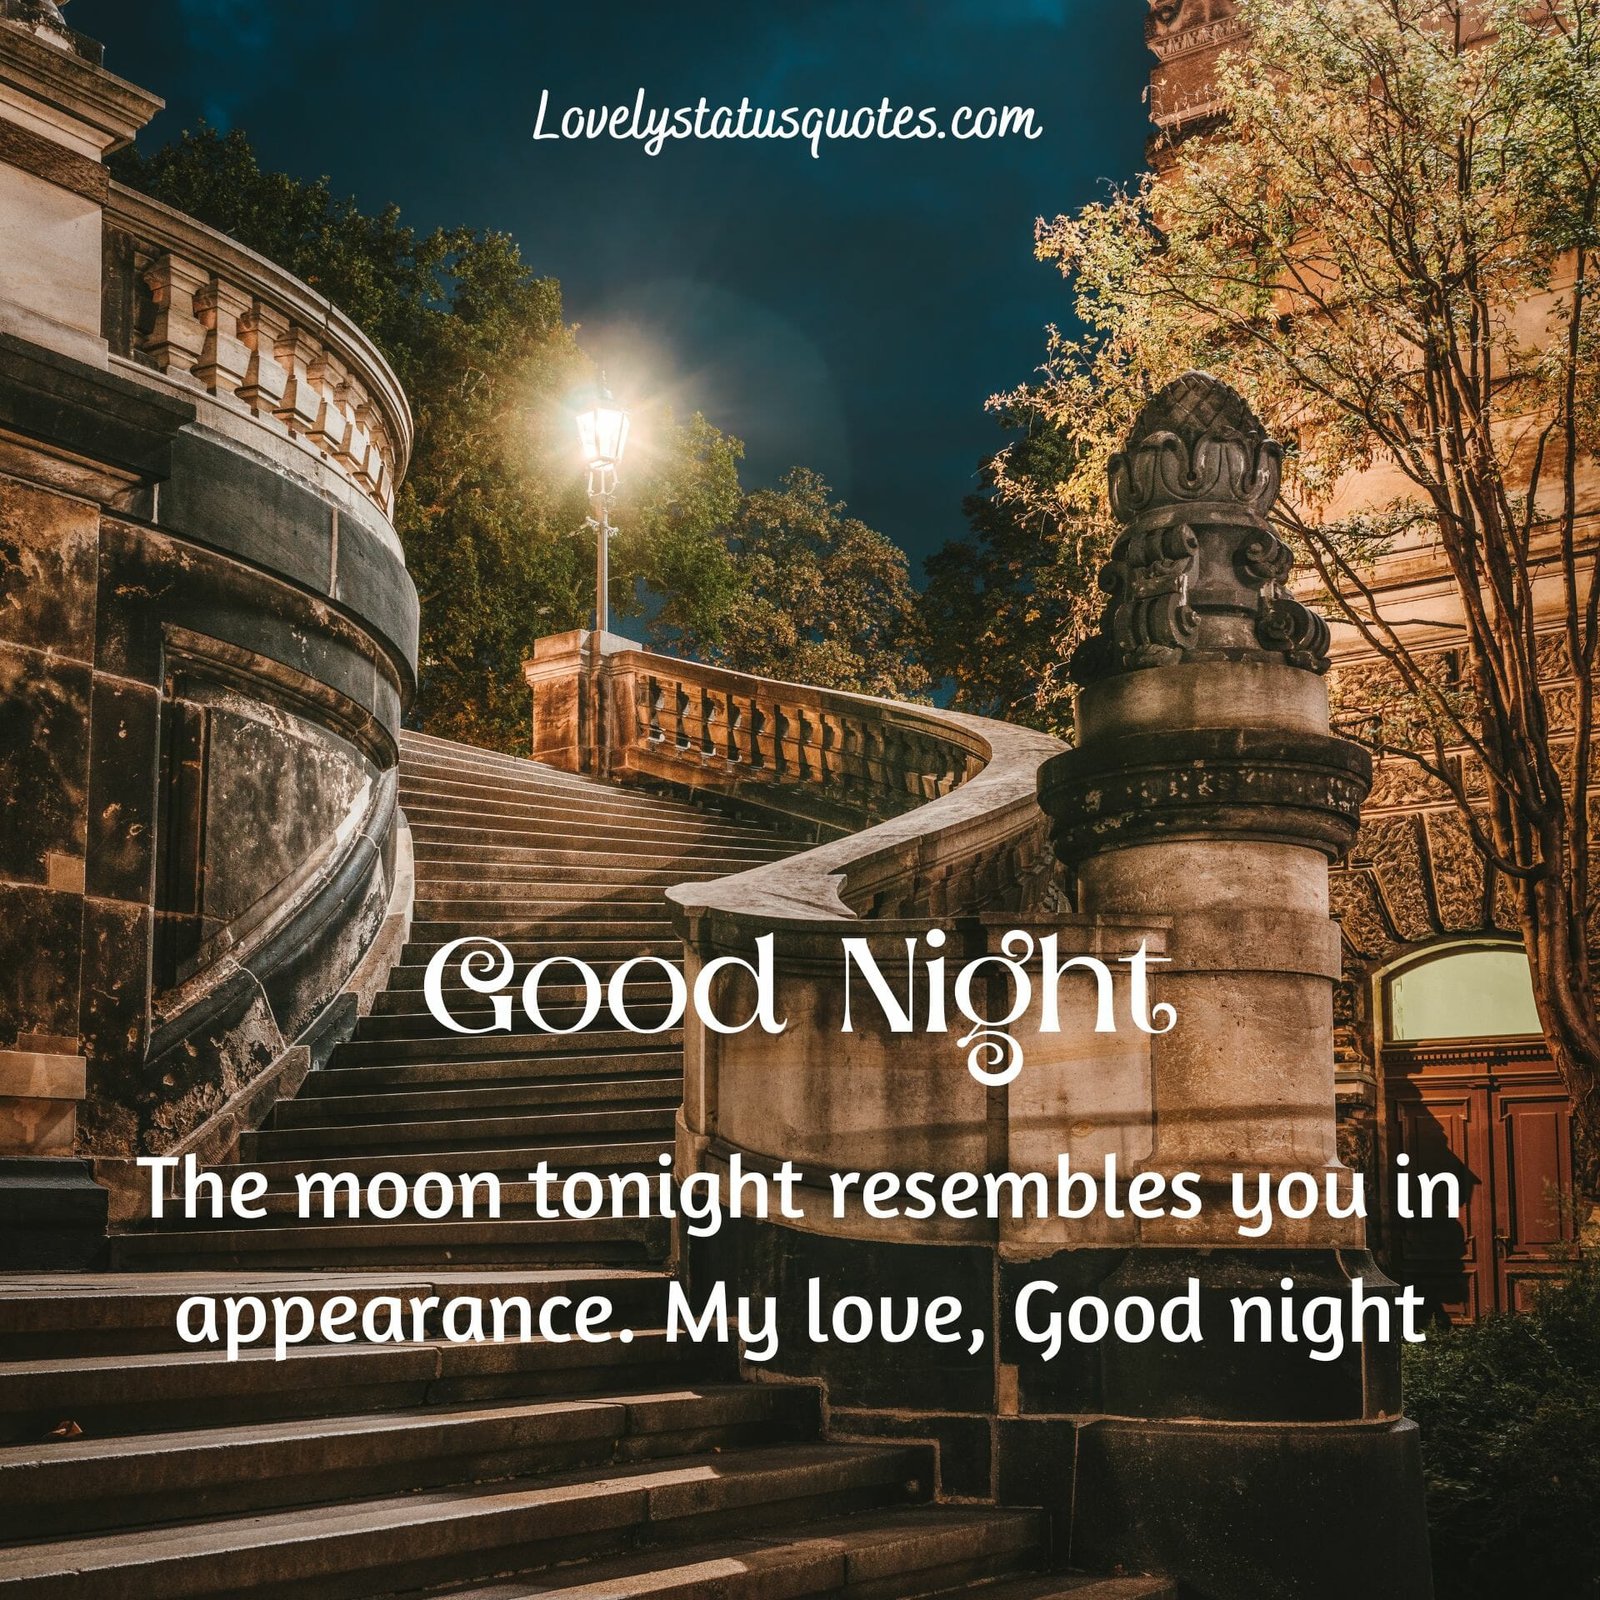 Good night whatsapp status.The moon tonight resembles you in appearance. My love, Good night